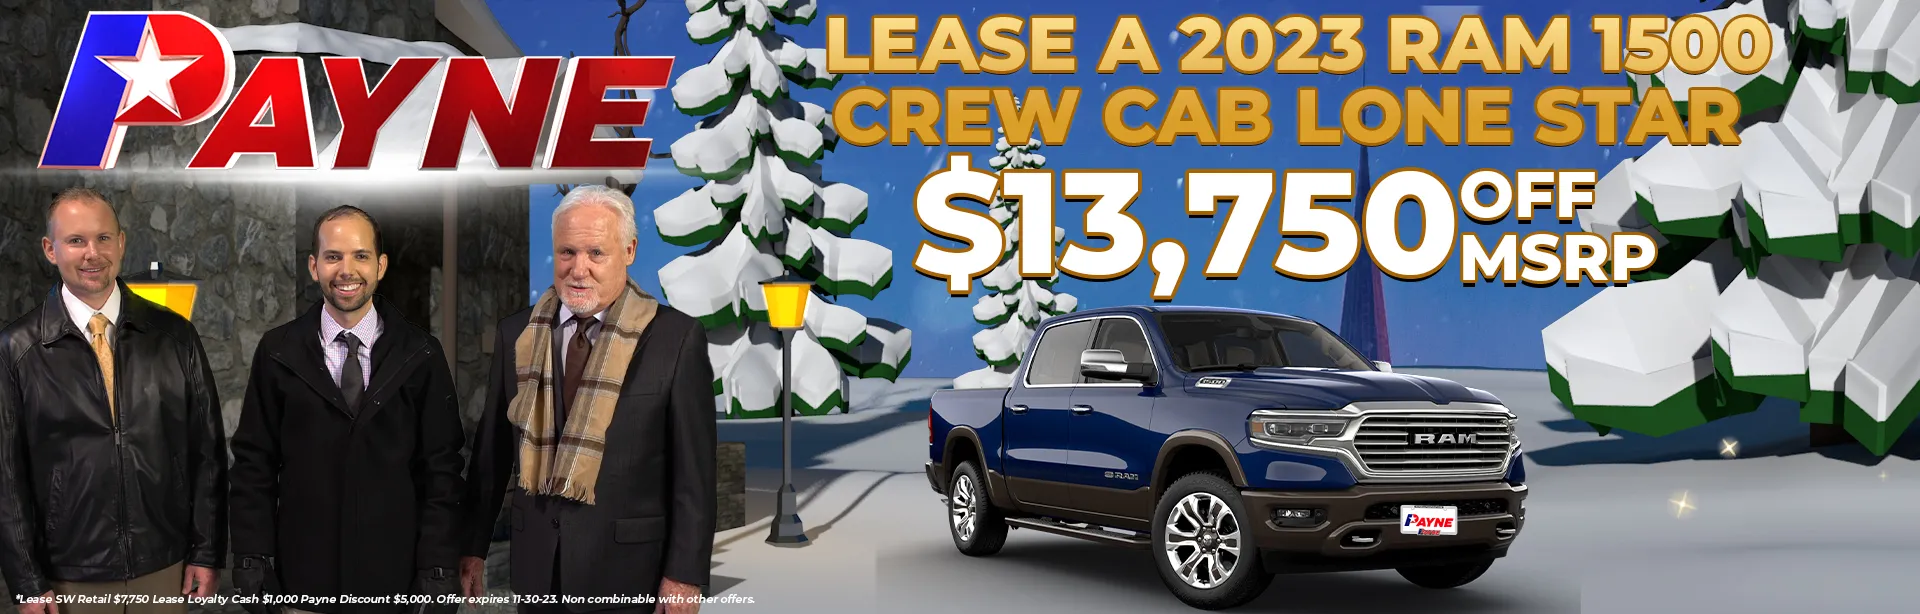 2023 RAM 1500 Crew Cab Lone Star Lease $13,750 Off MSRP